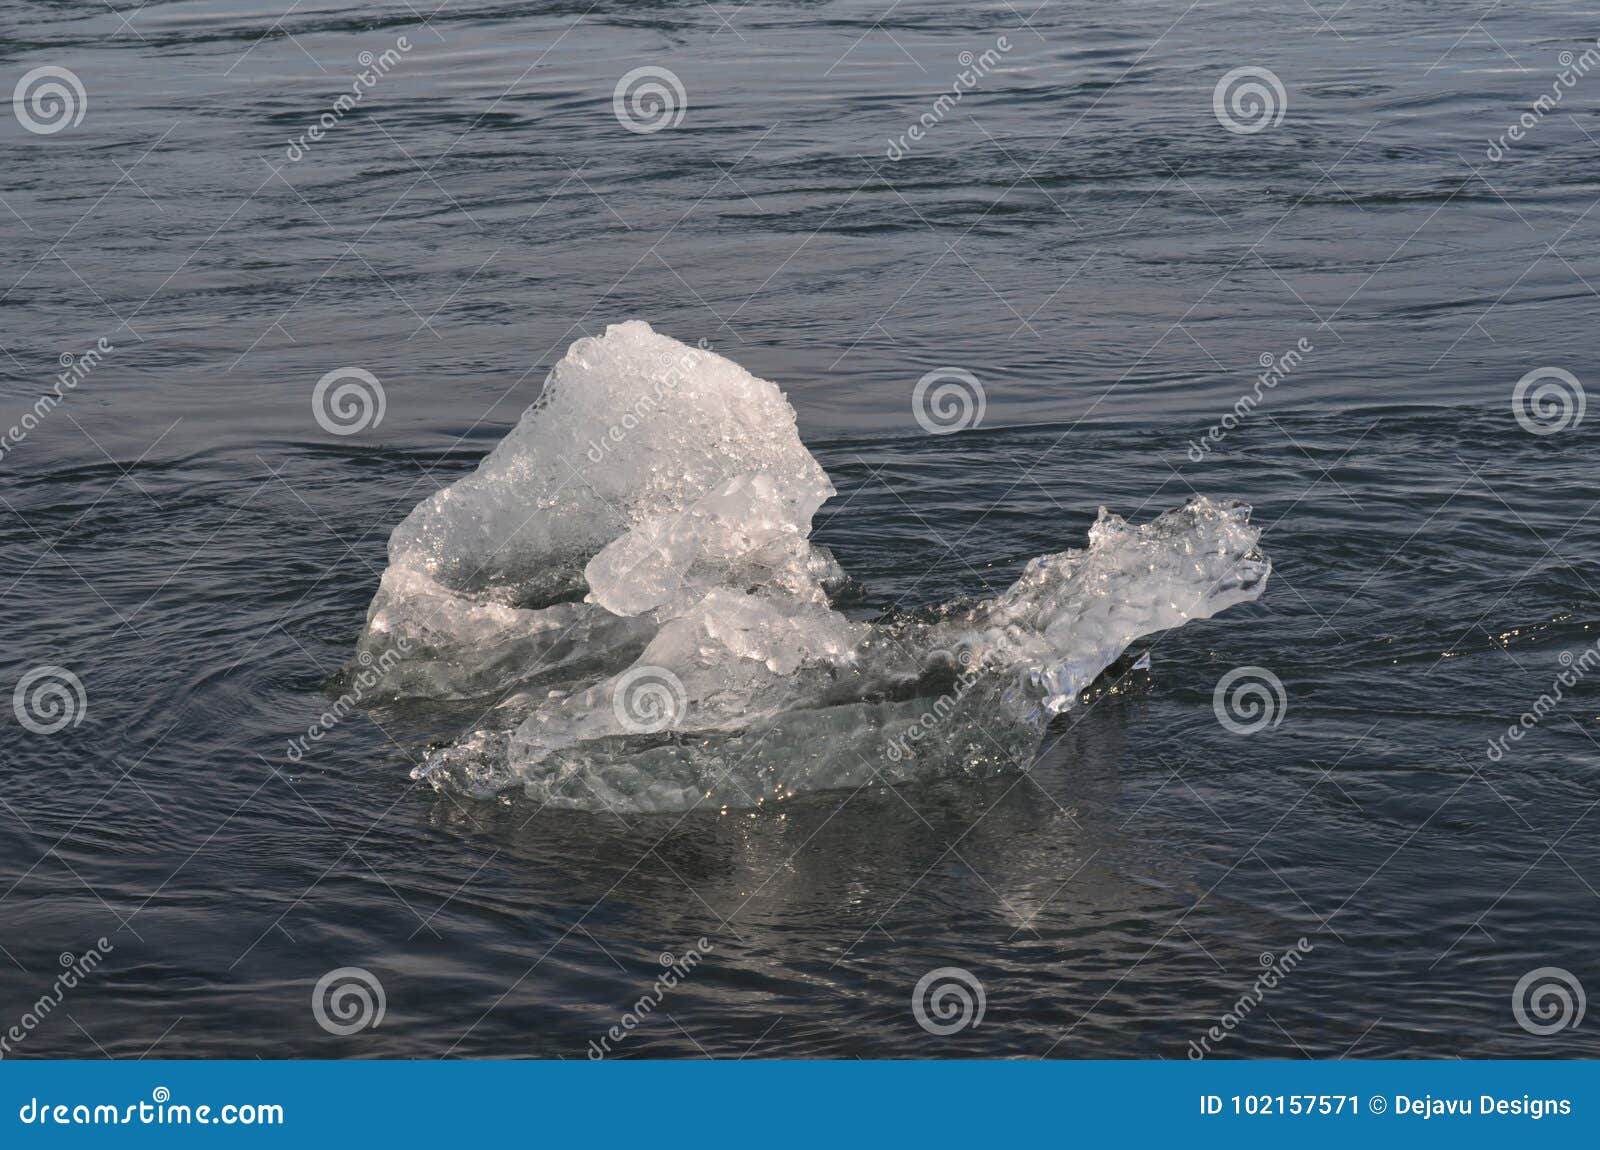 unique icefloe in the icey waters of iceland